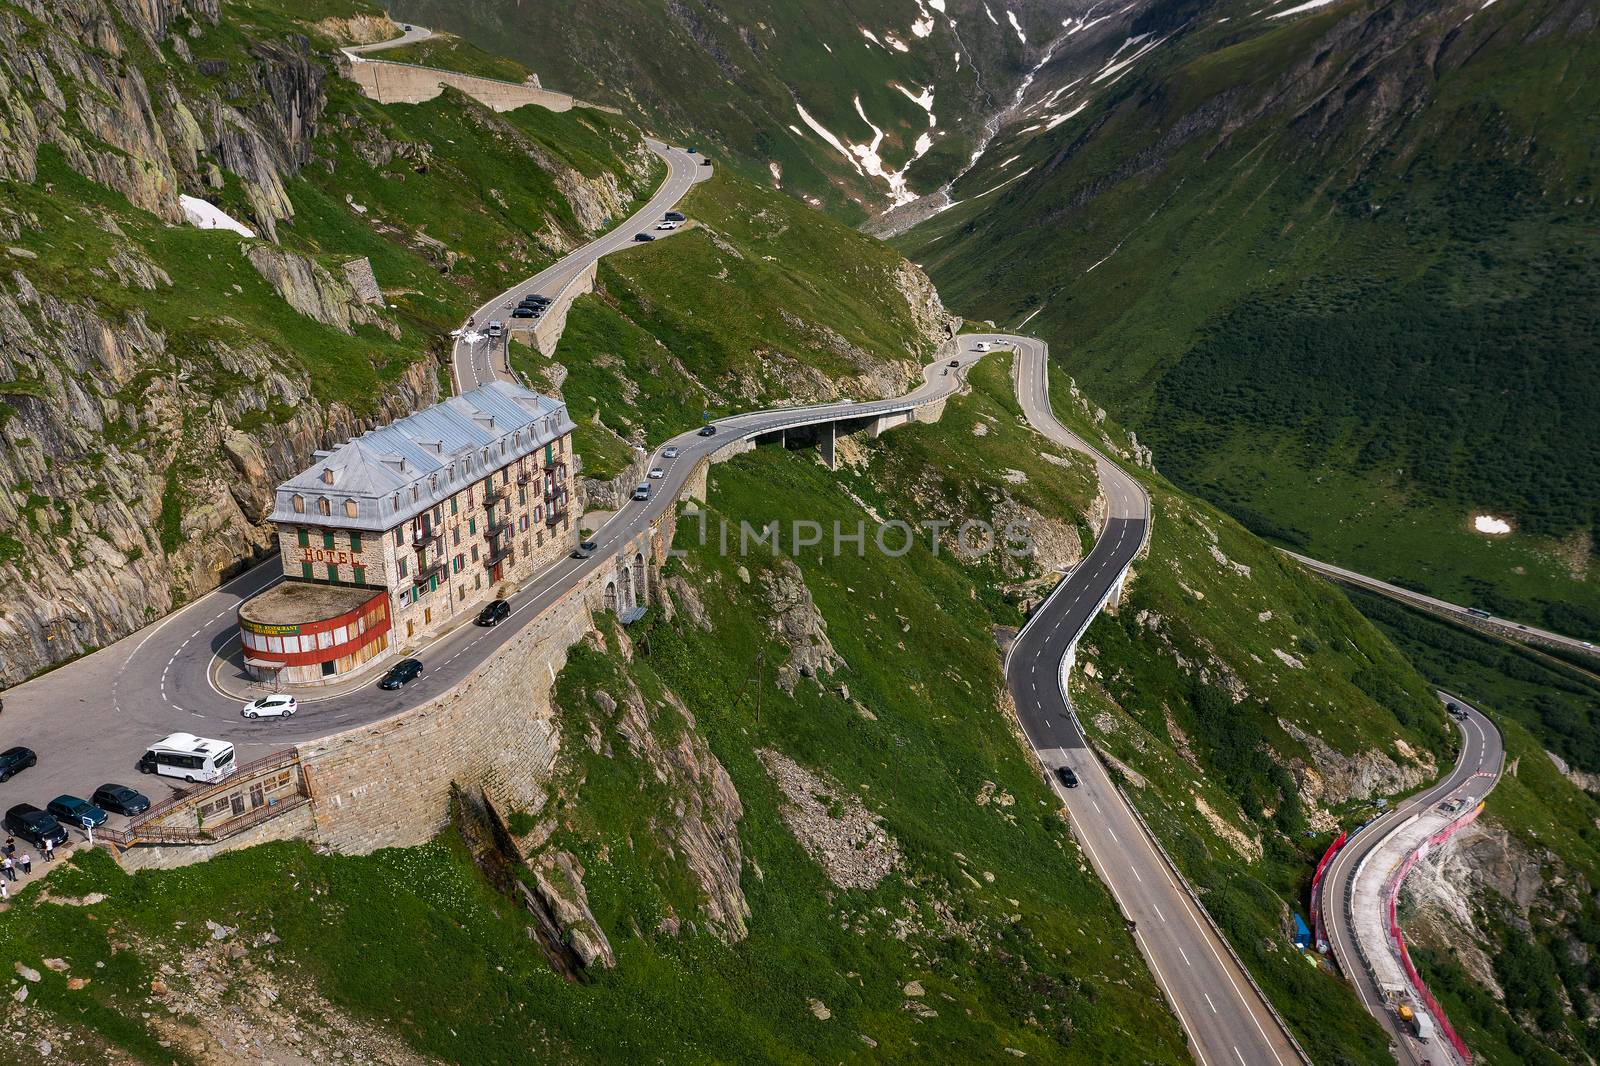 Furka Pass, Switzerland - July 21, 2019 : Aerial view of the closed mountain hotel Belvedere located near the Rhone Glacier at the Furka Pass.